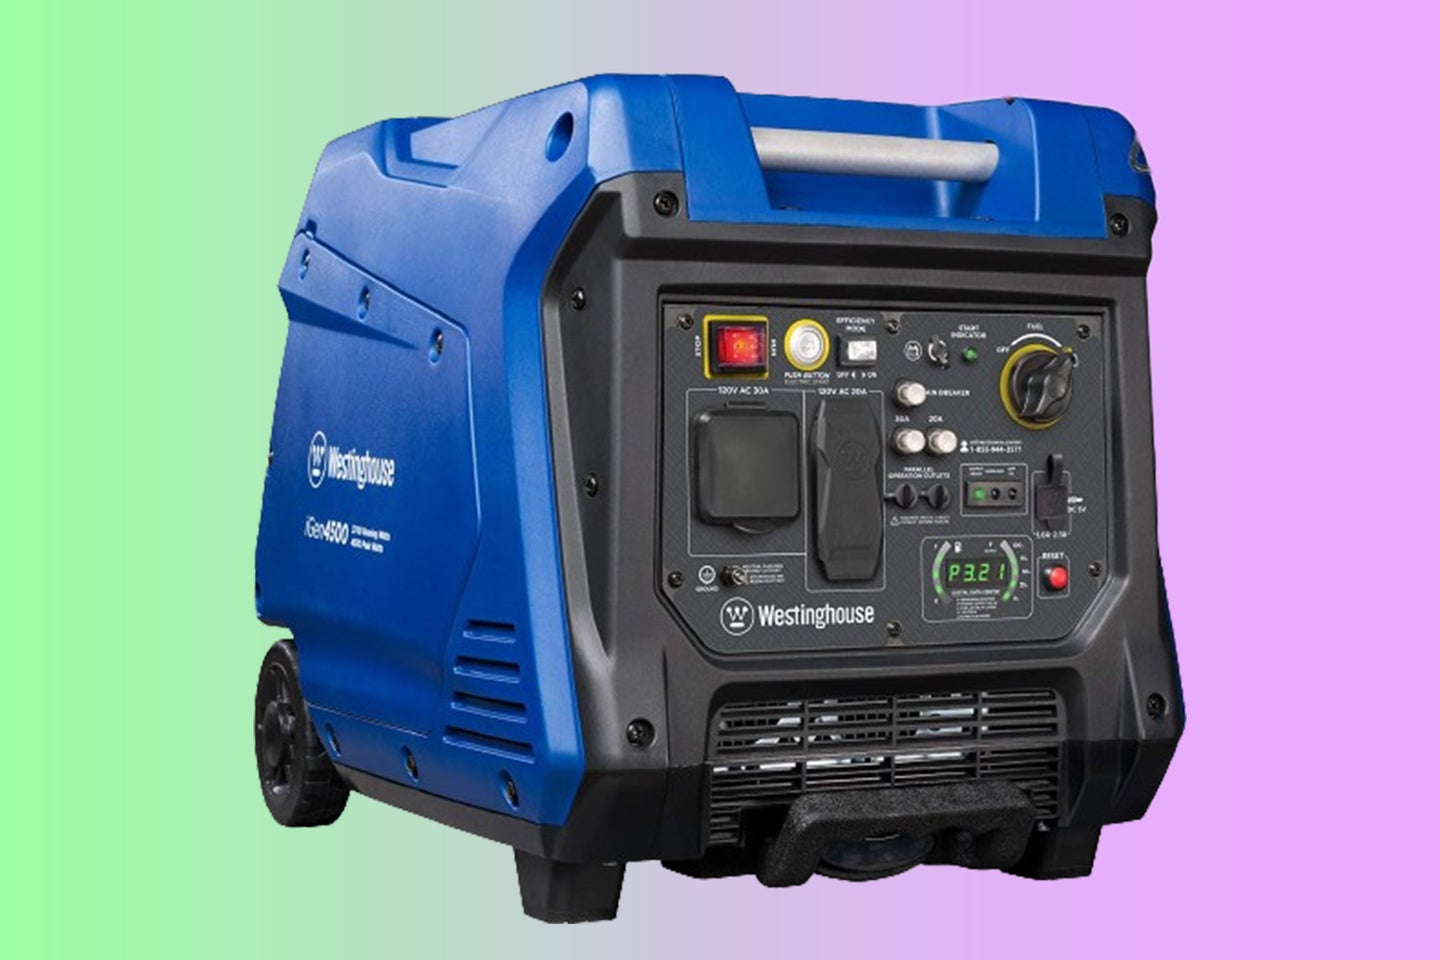 A blue Westinghouse inverter generator on a pink and green background